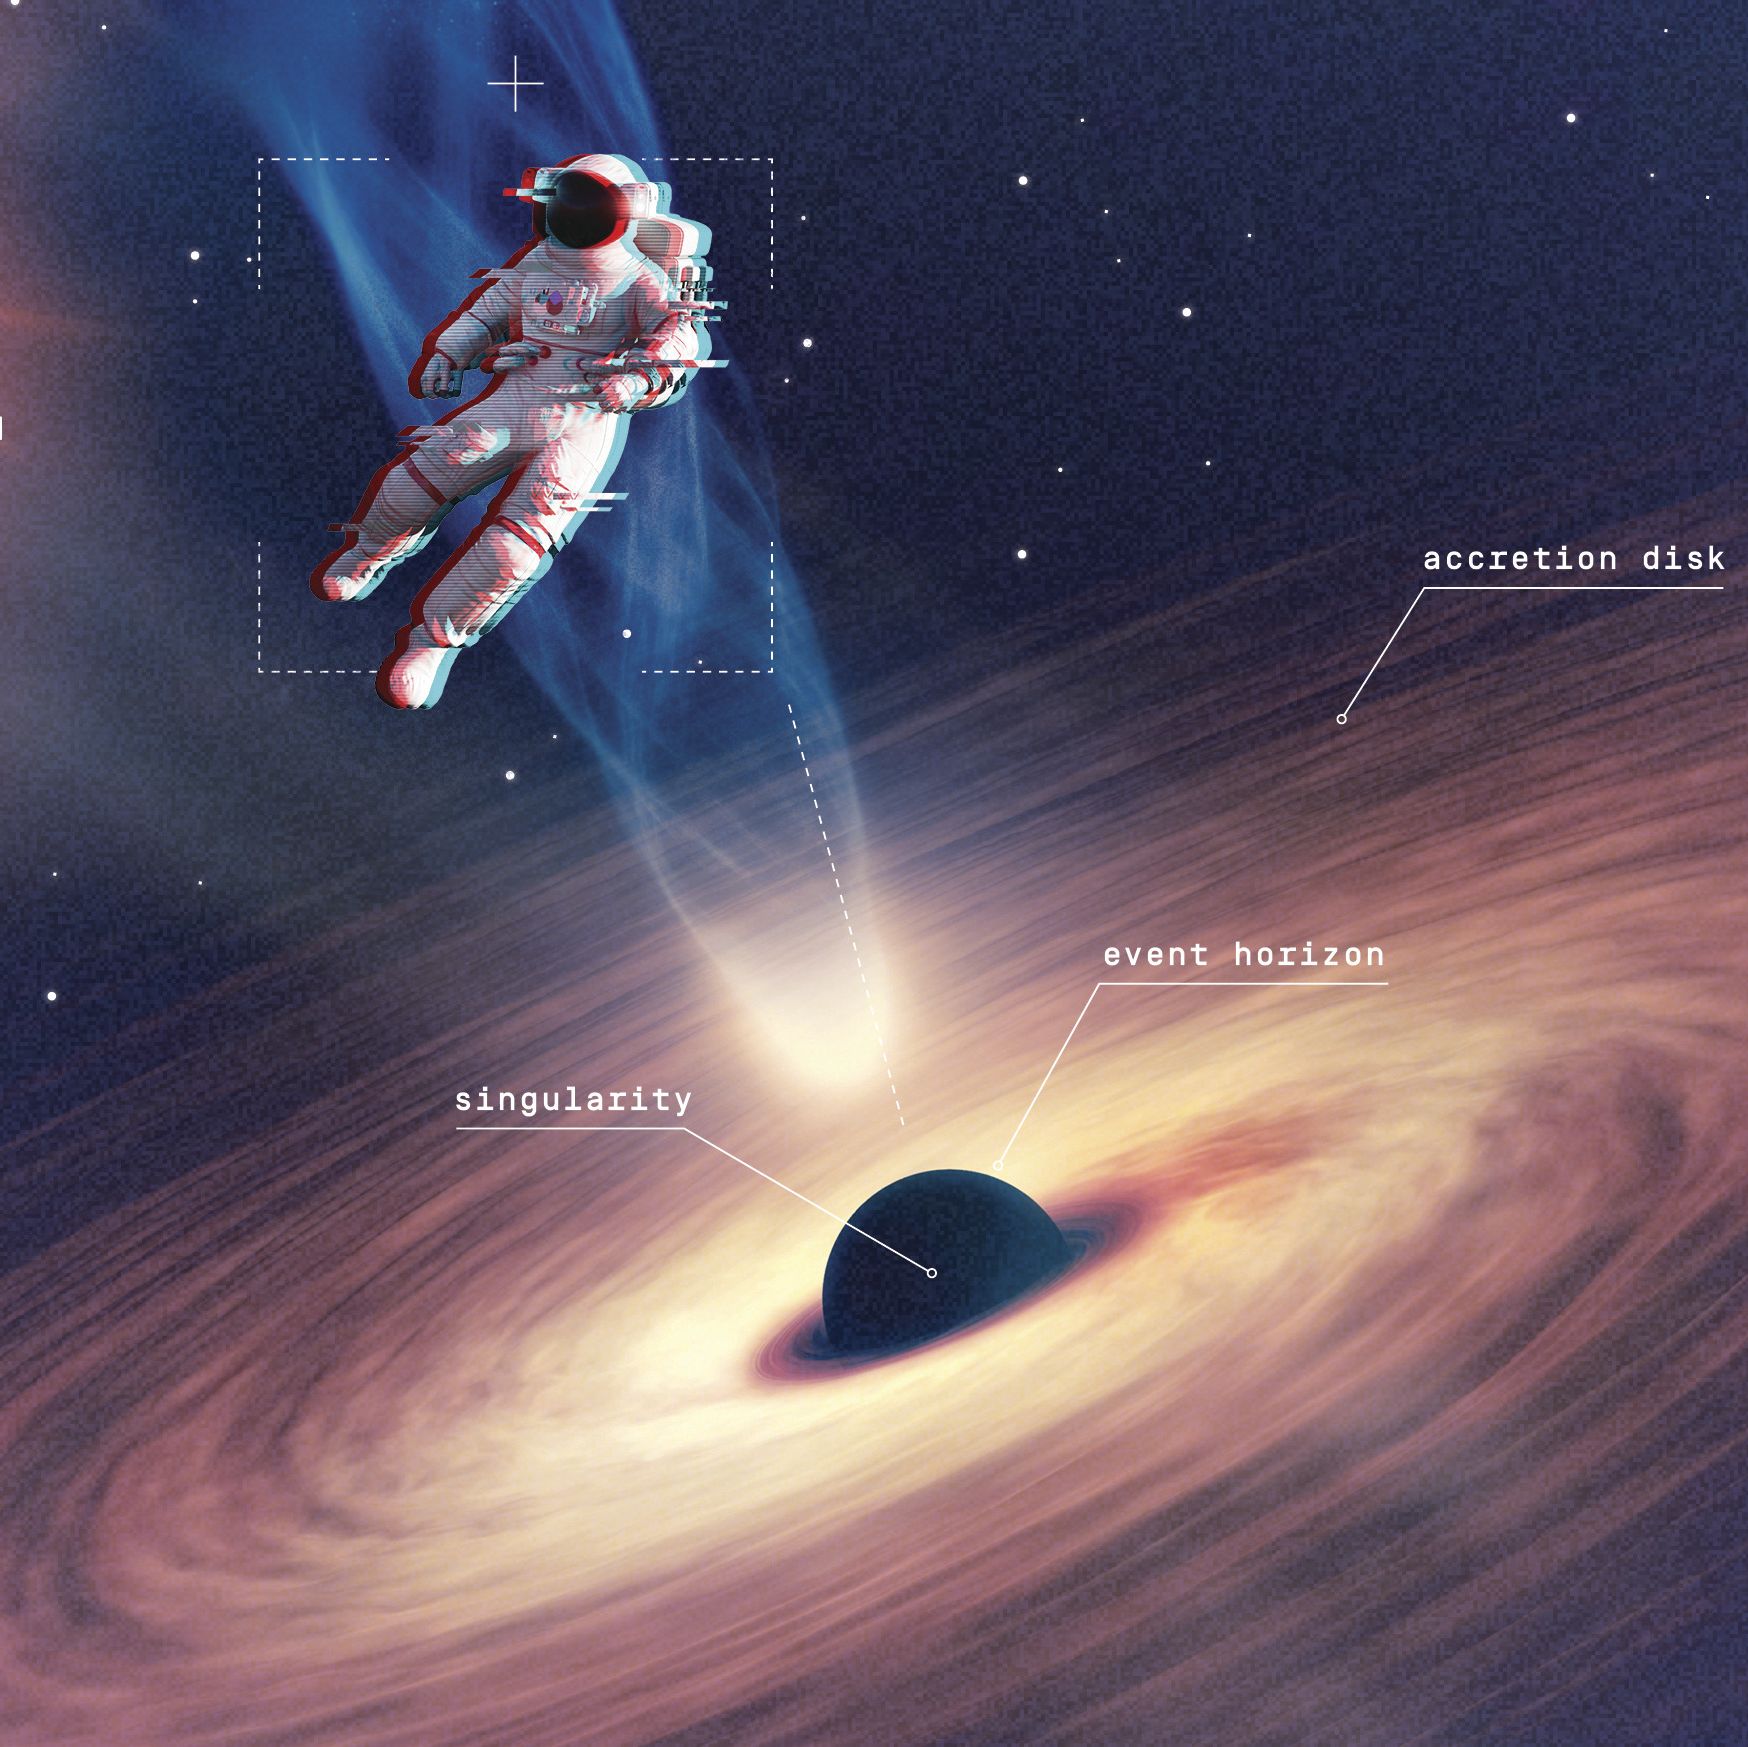 How to Safely Jump Into a Black Hole